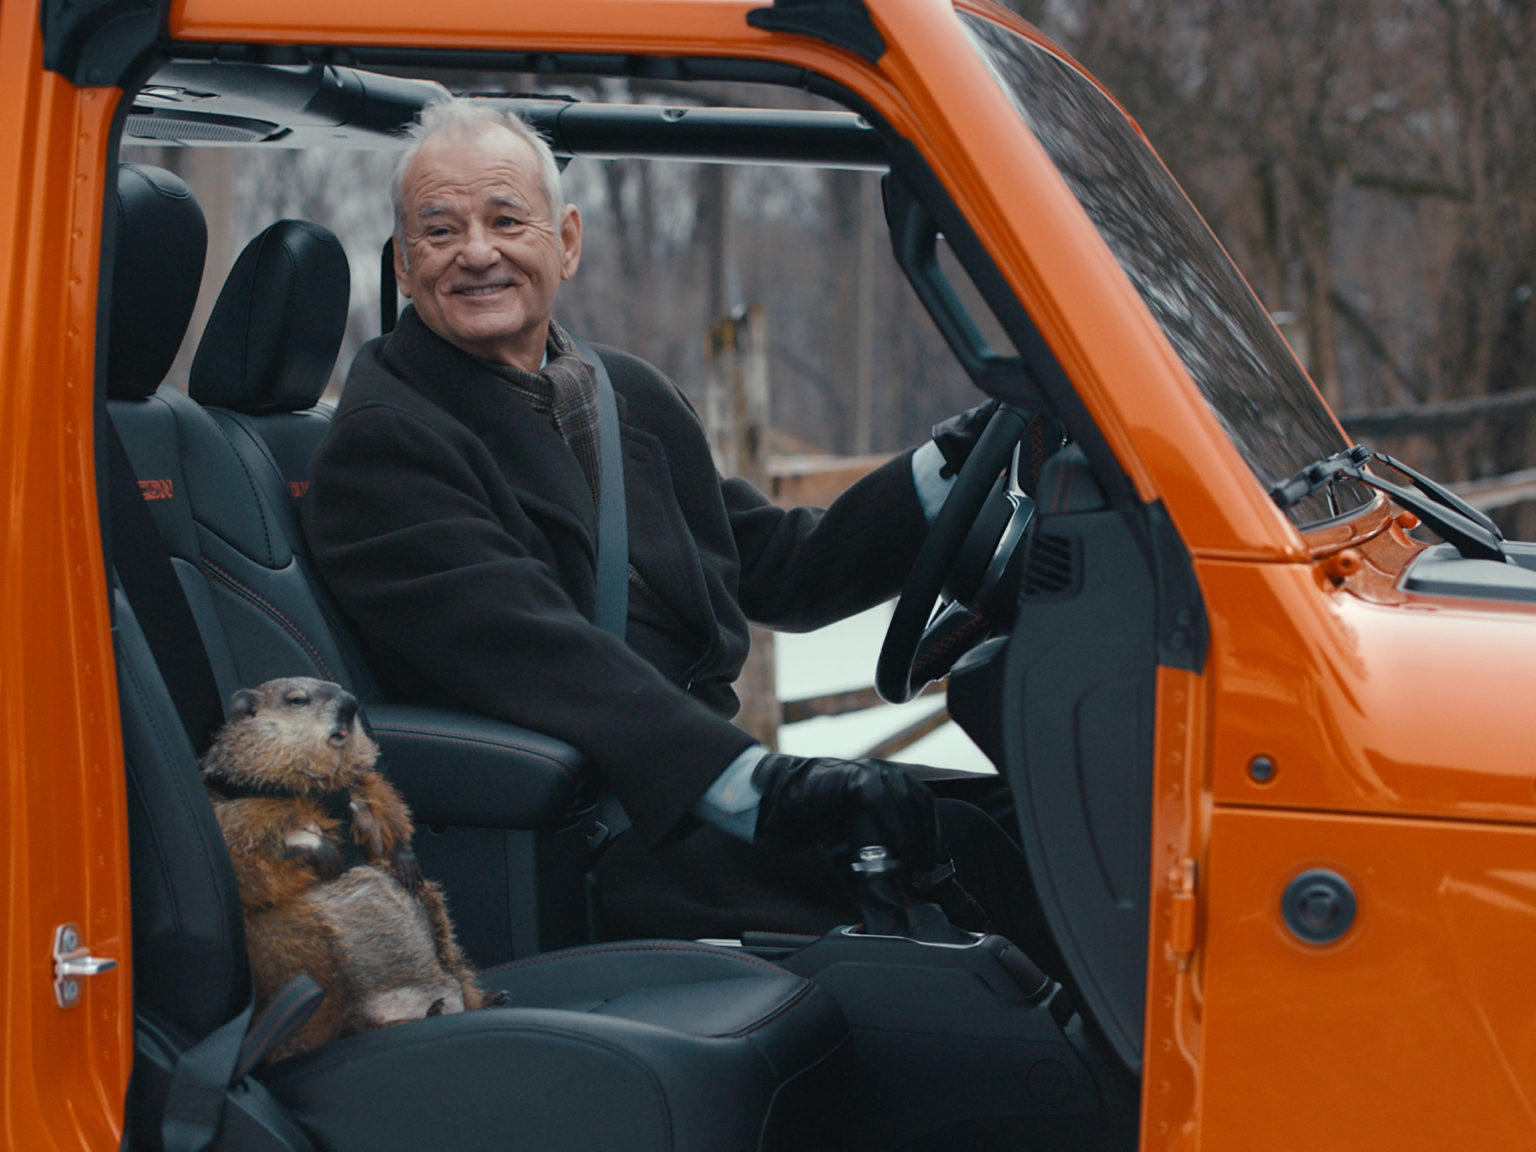 Actor Bill Murray stars in Jeep's new Super Bowl commercial.